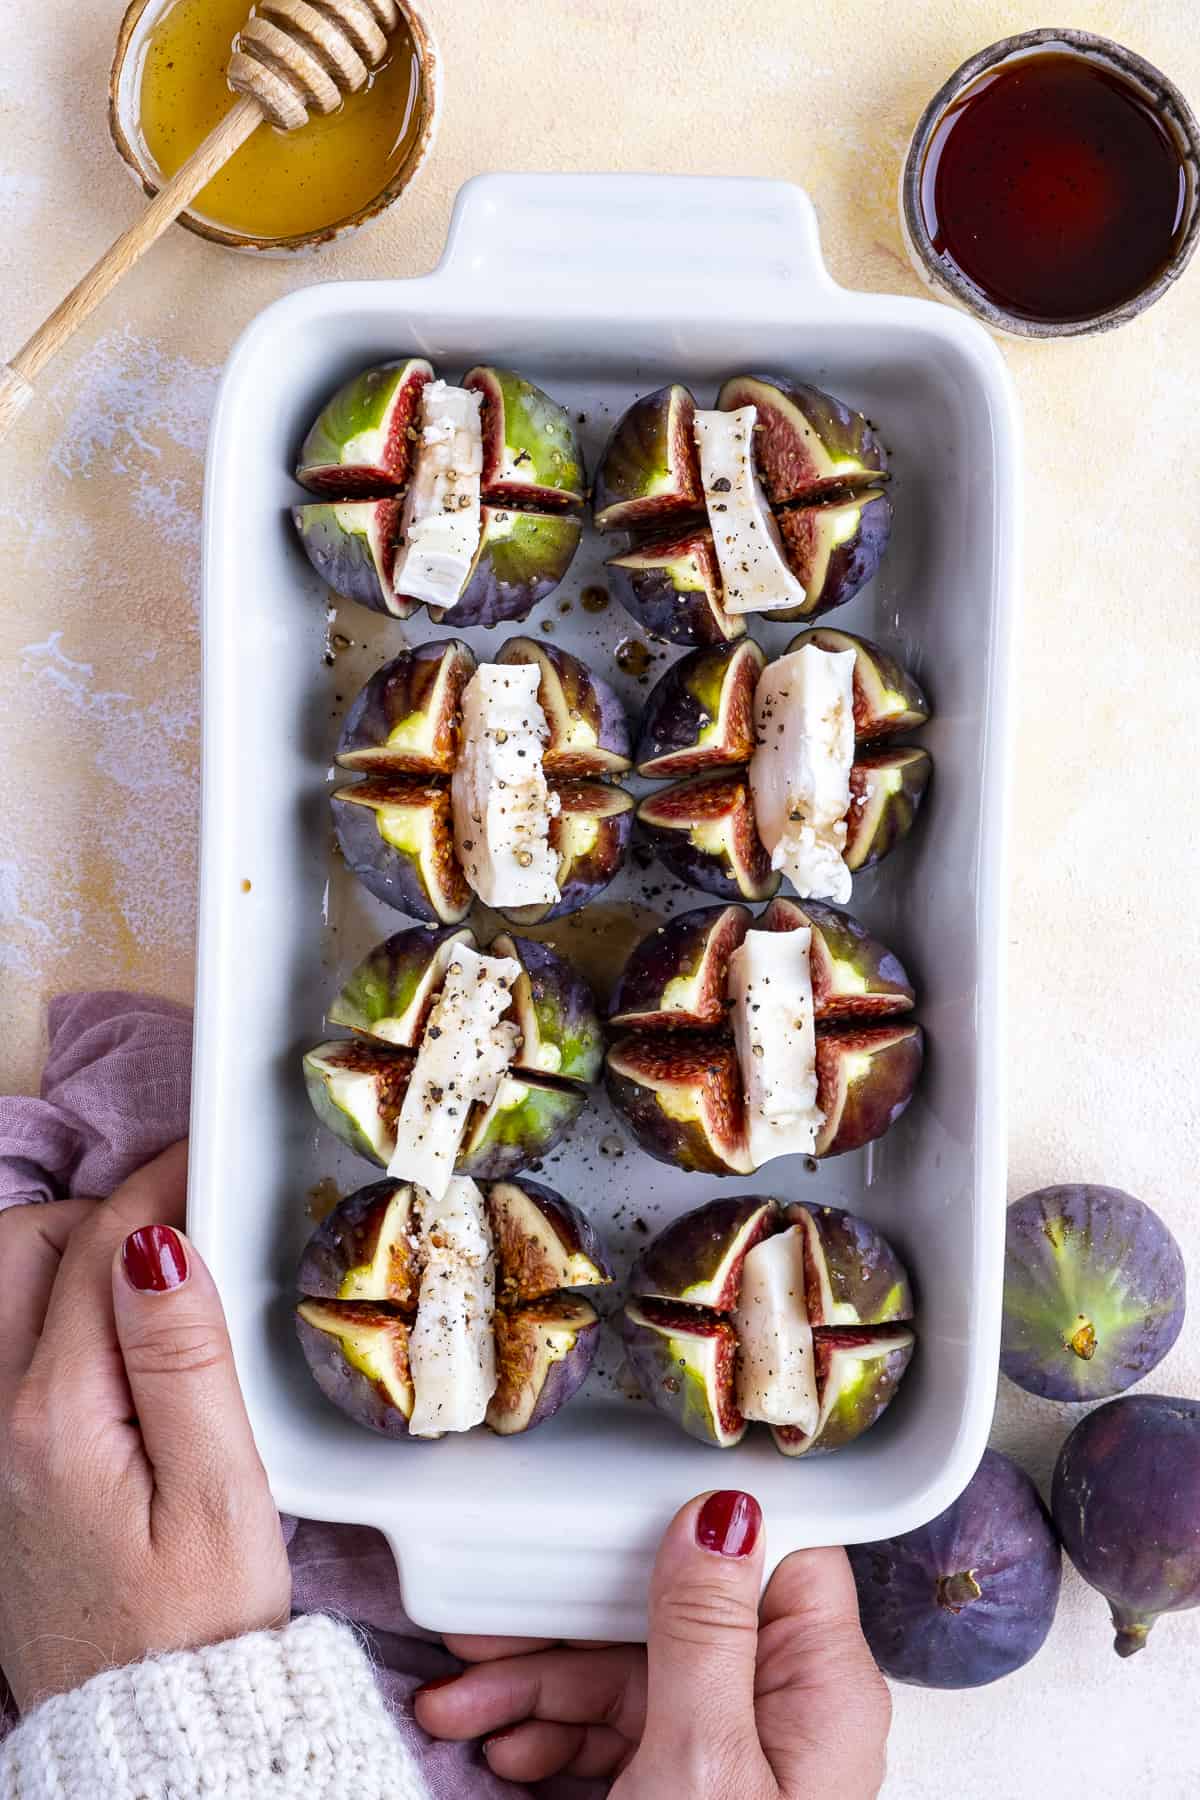 Woman hands holding a baking pan with fresh figs stuffed with cheese.